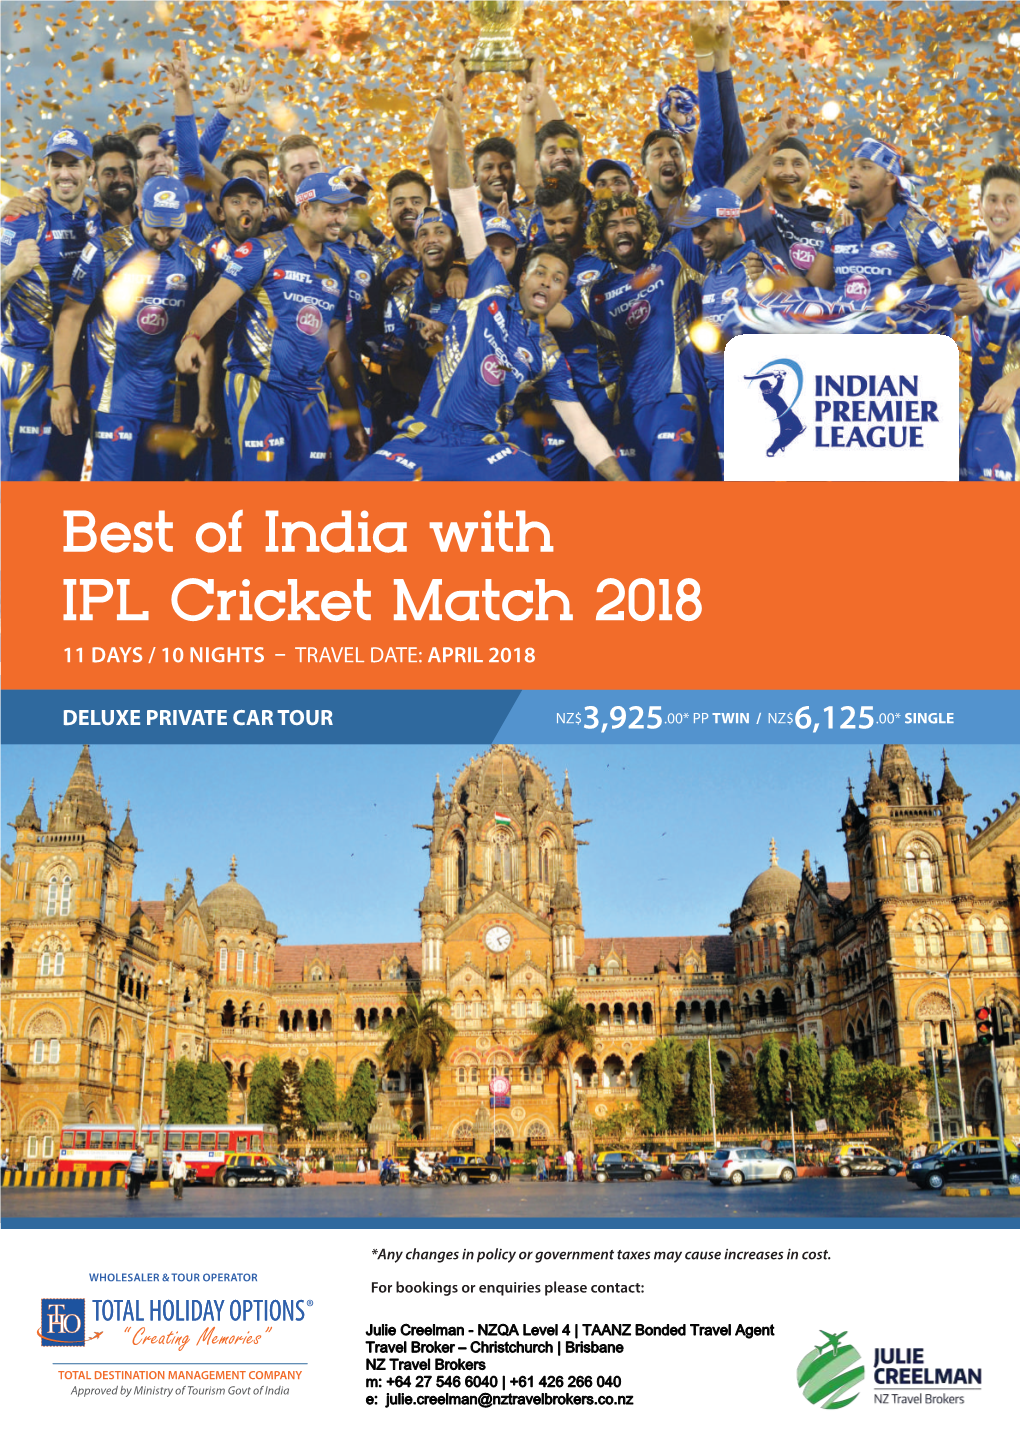 Best of India with IPL Cricket Match 2018 11 DAYS / 10 NIGHTS – TRAVEL DATE: APRIL 2018